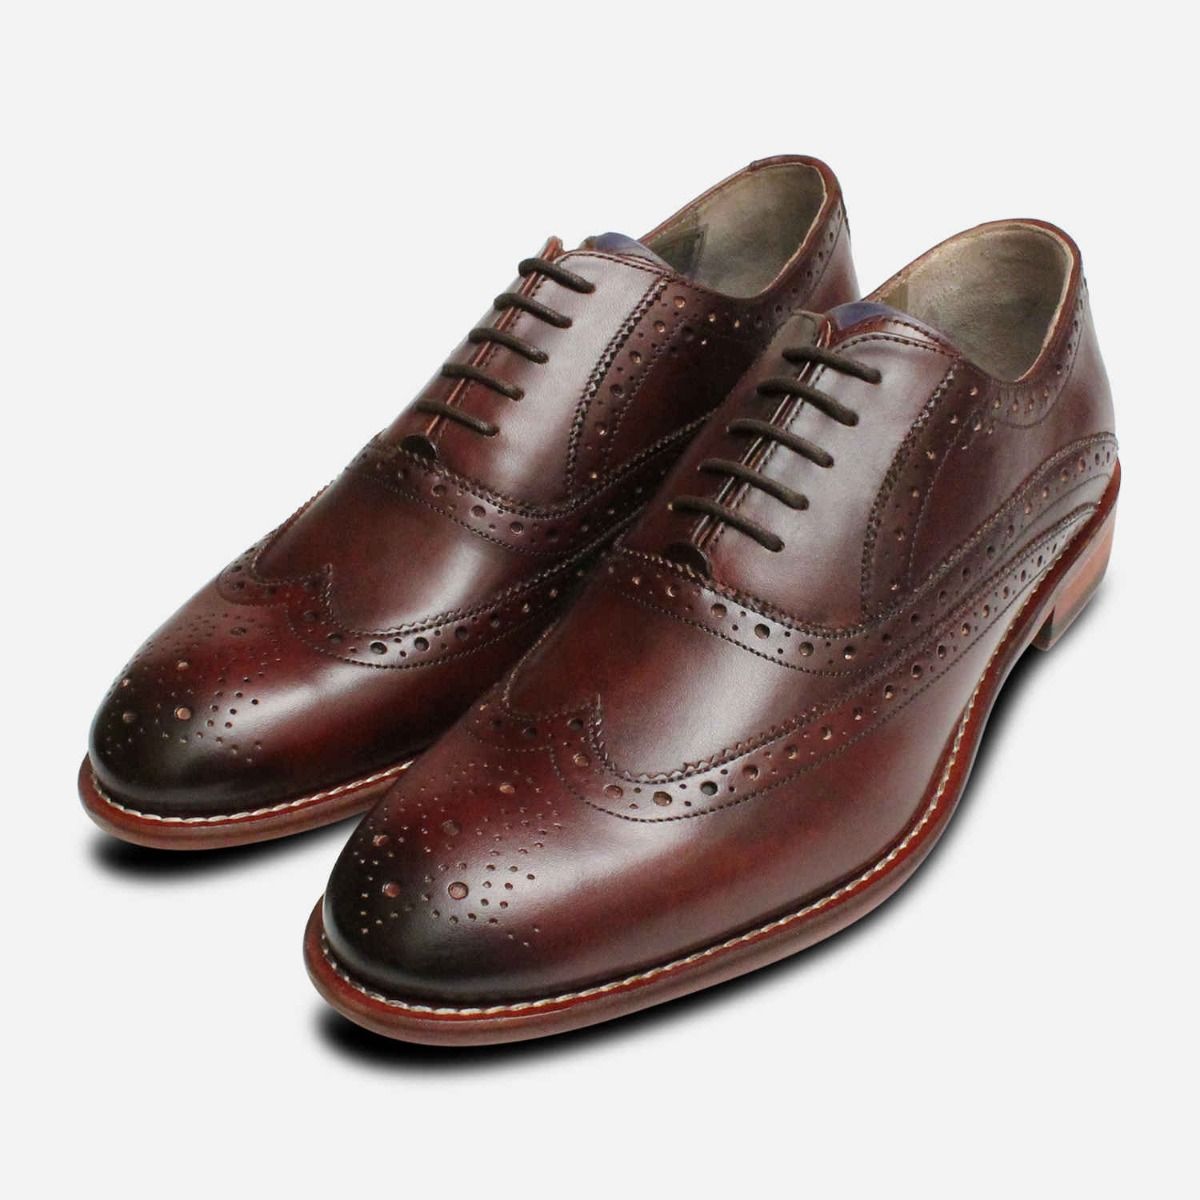 Oliver Sweeney Fellbeck Mens Oxford Brogues in Chestnut